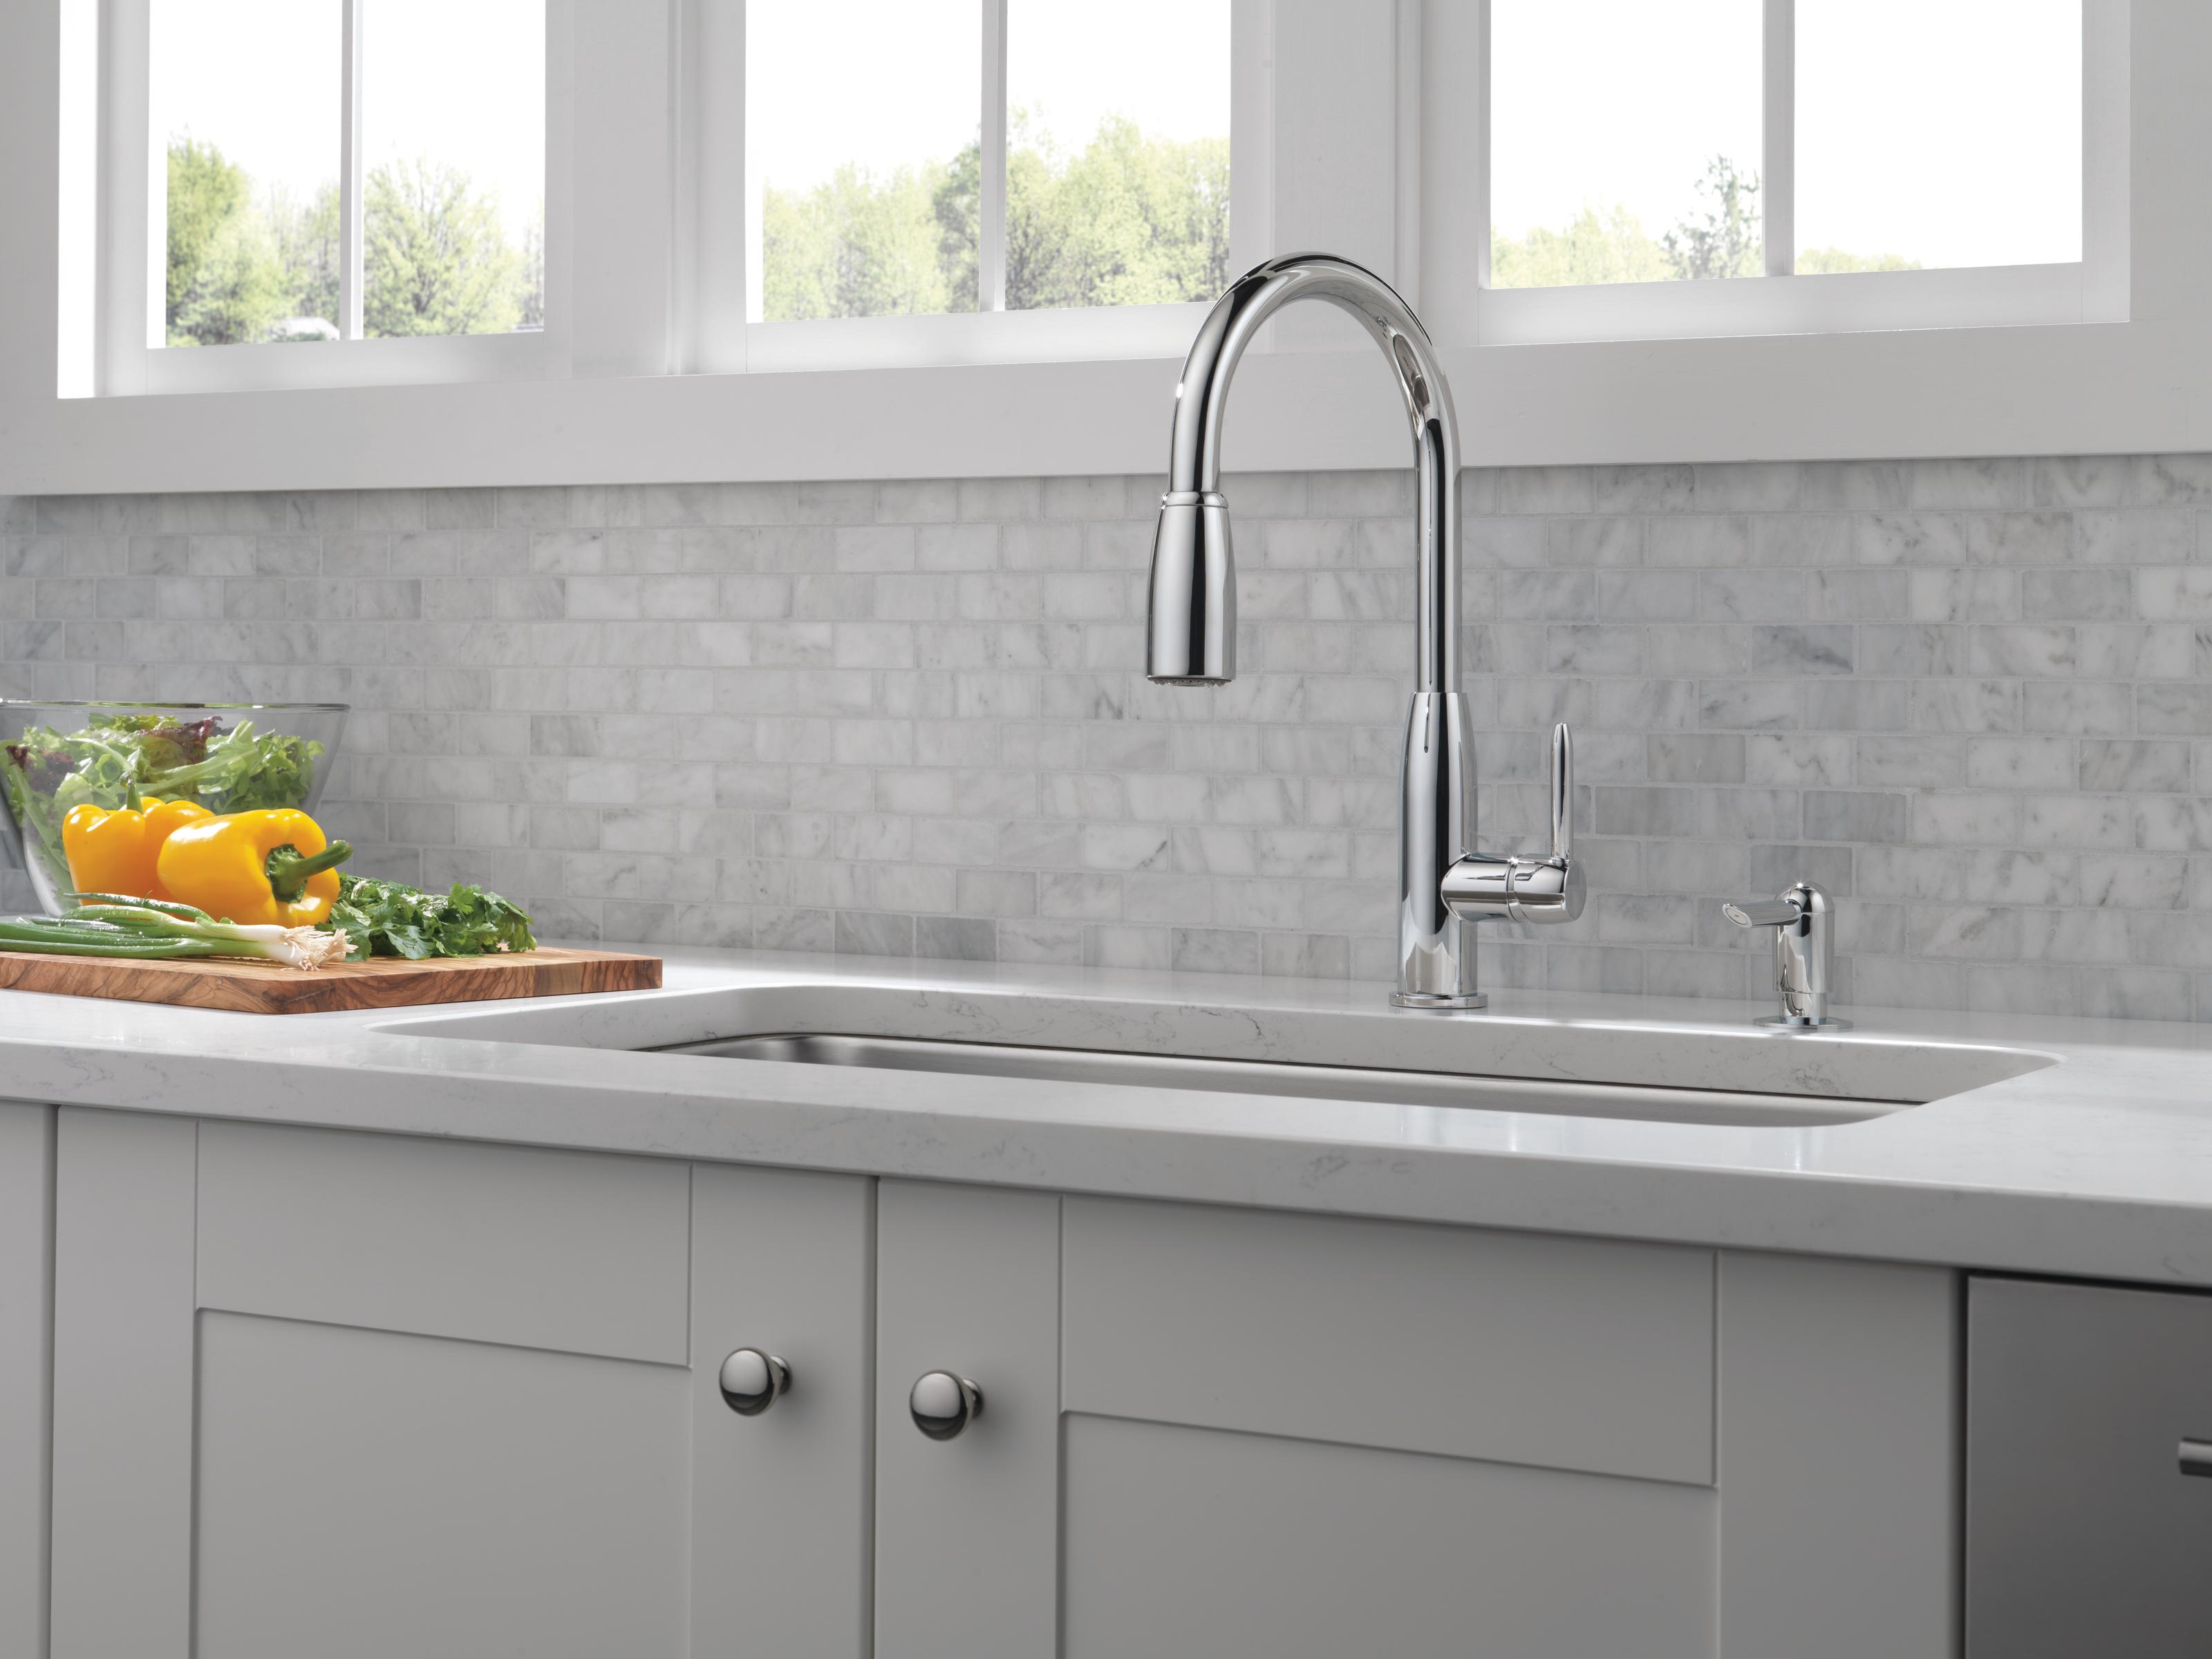 Peerless Core Kitchen Single Handle Pull-Down Faucet in Chrome P88103LF-SD-L - image 5 of 11